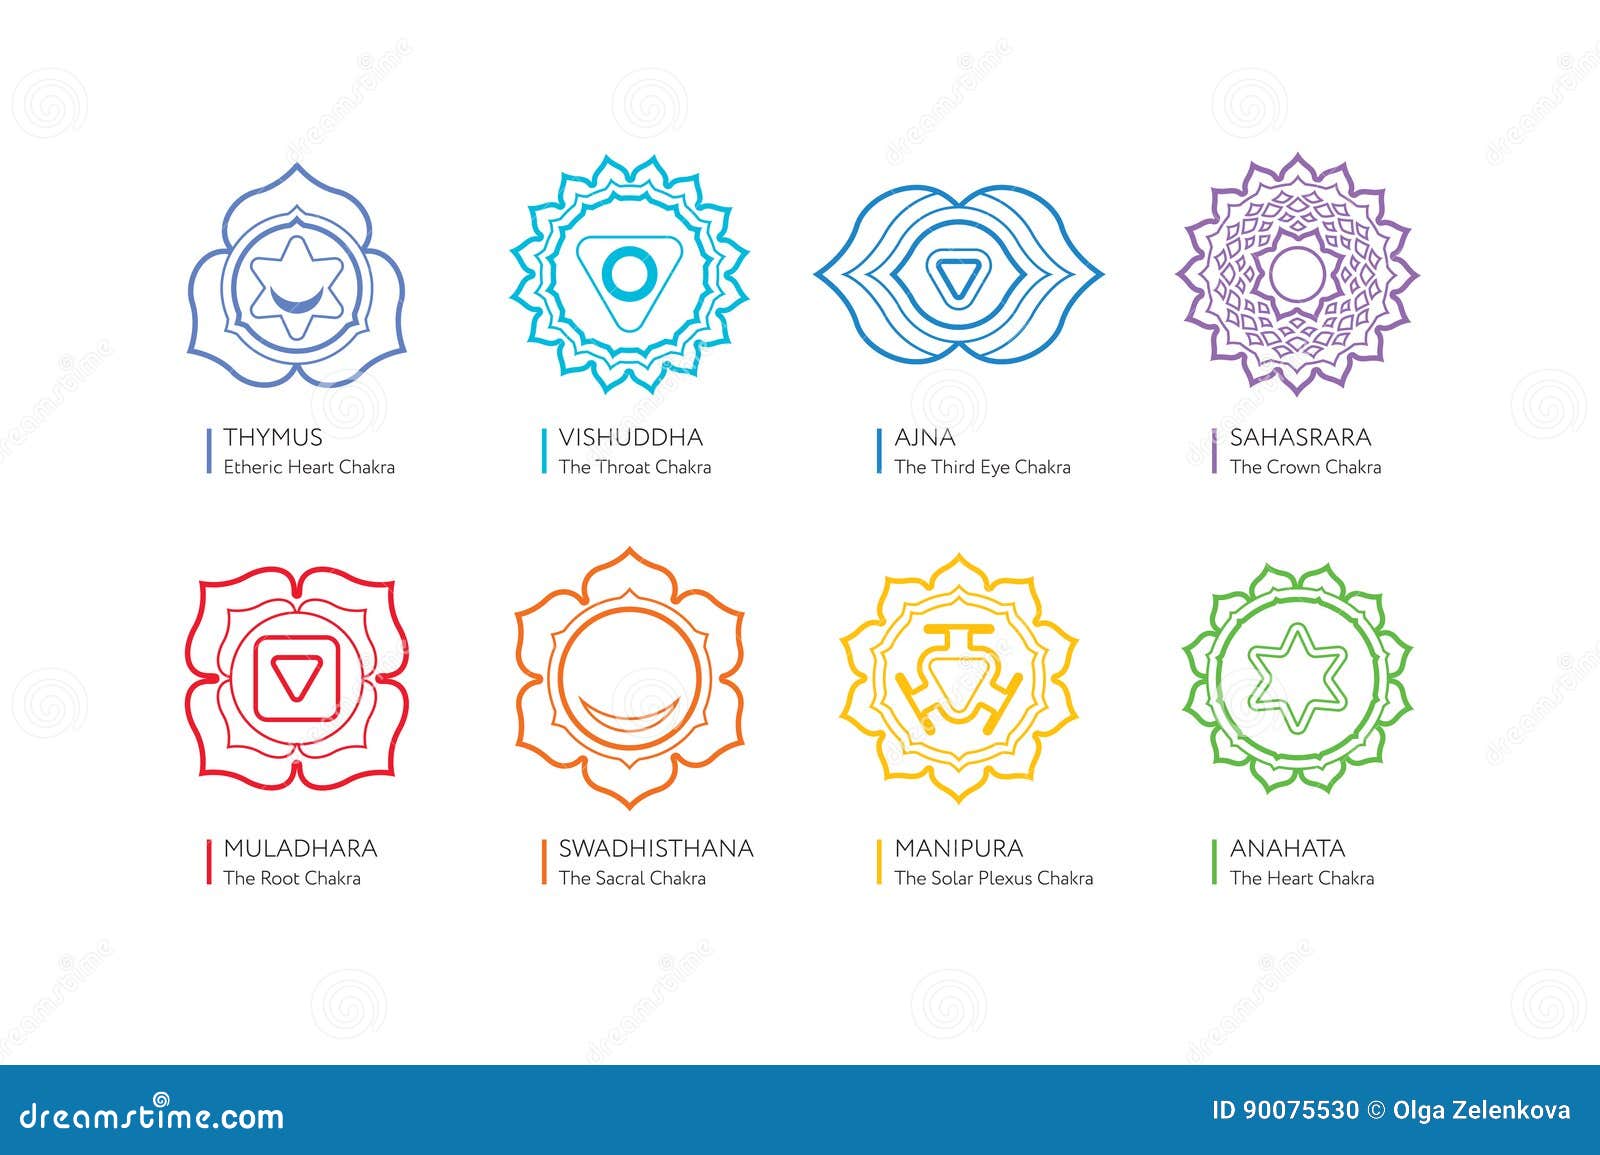 chakras system of human body - used in hinduism, buddhism, yoga and ayurveda.